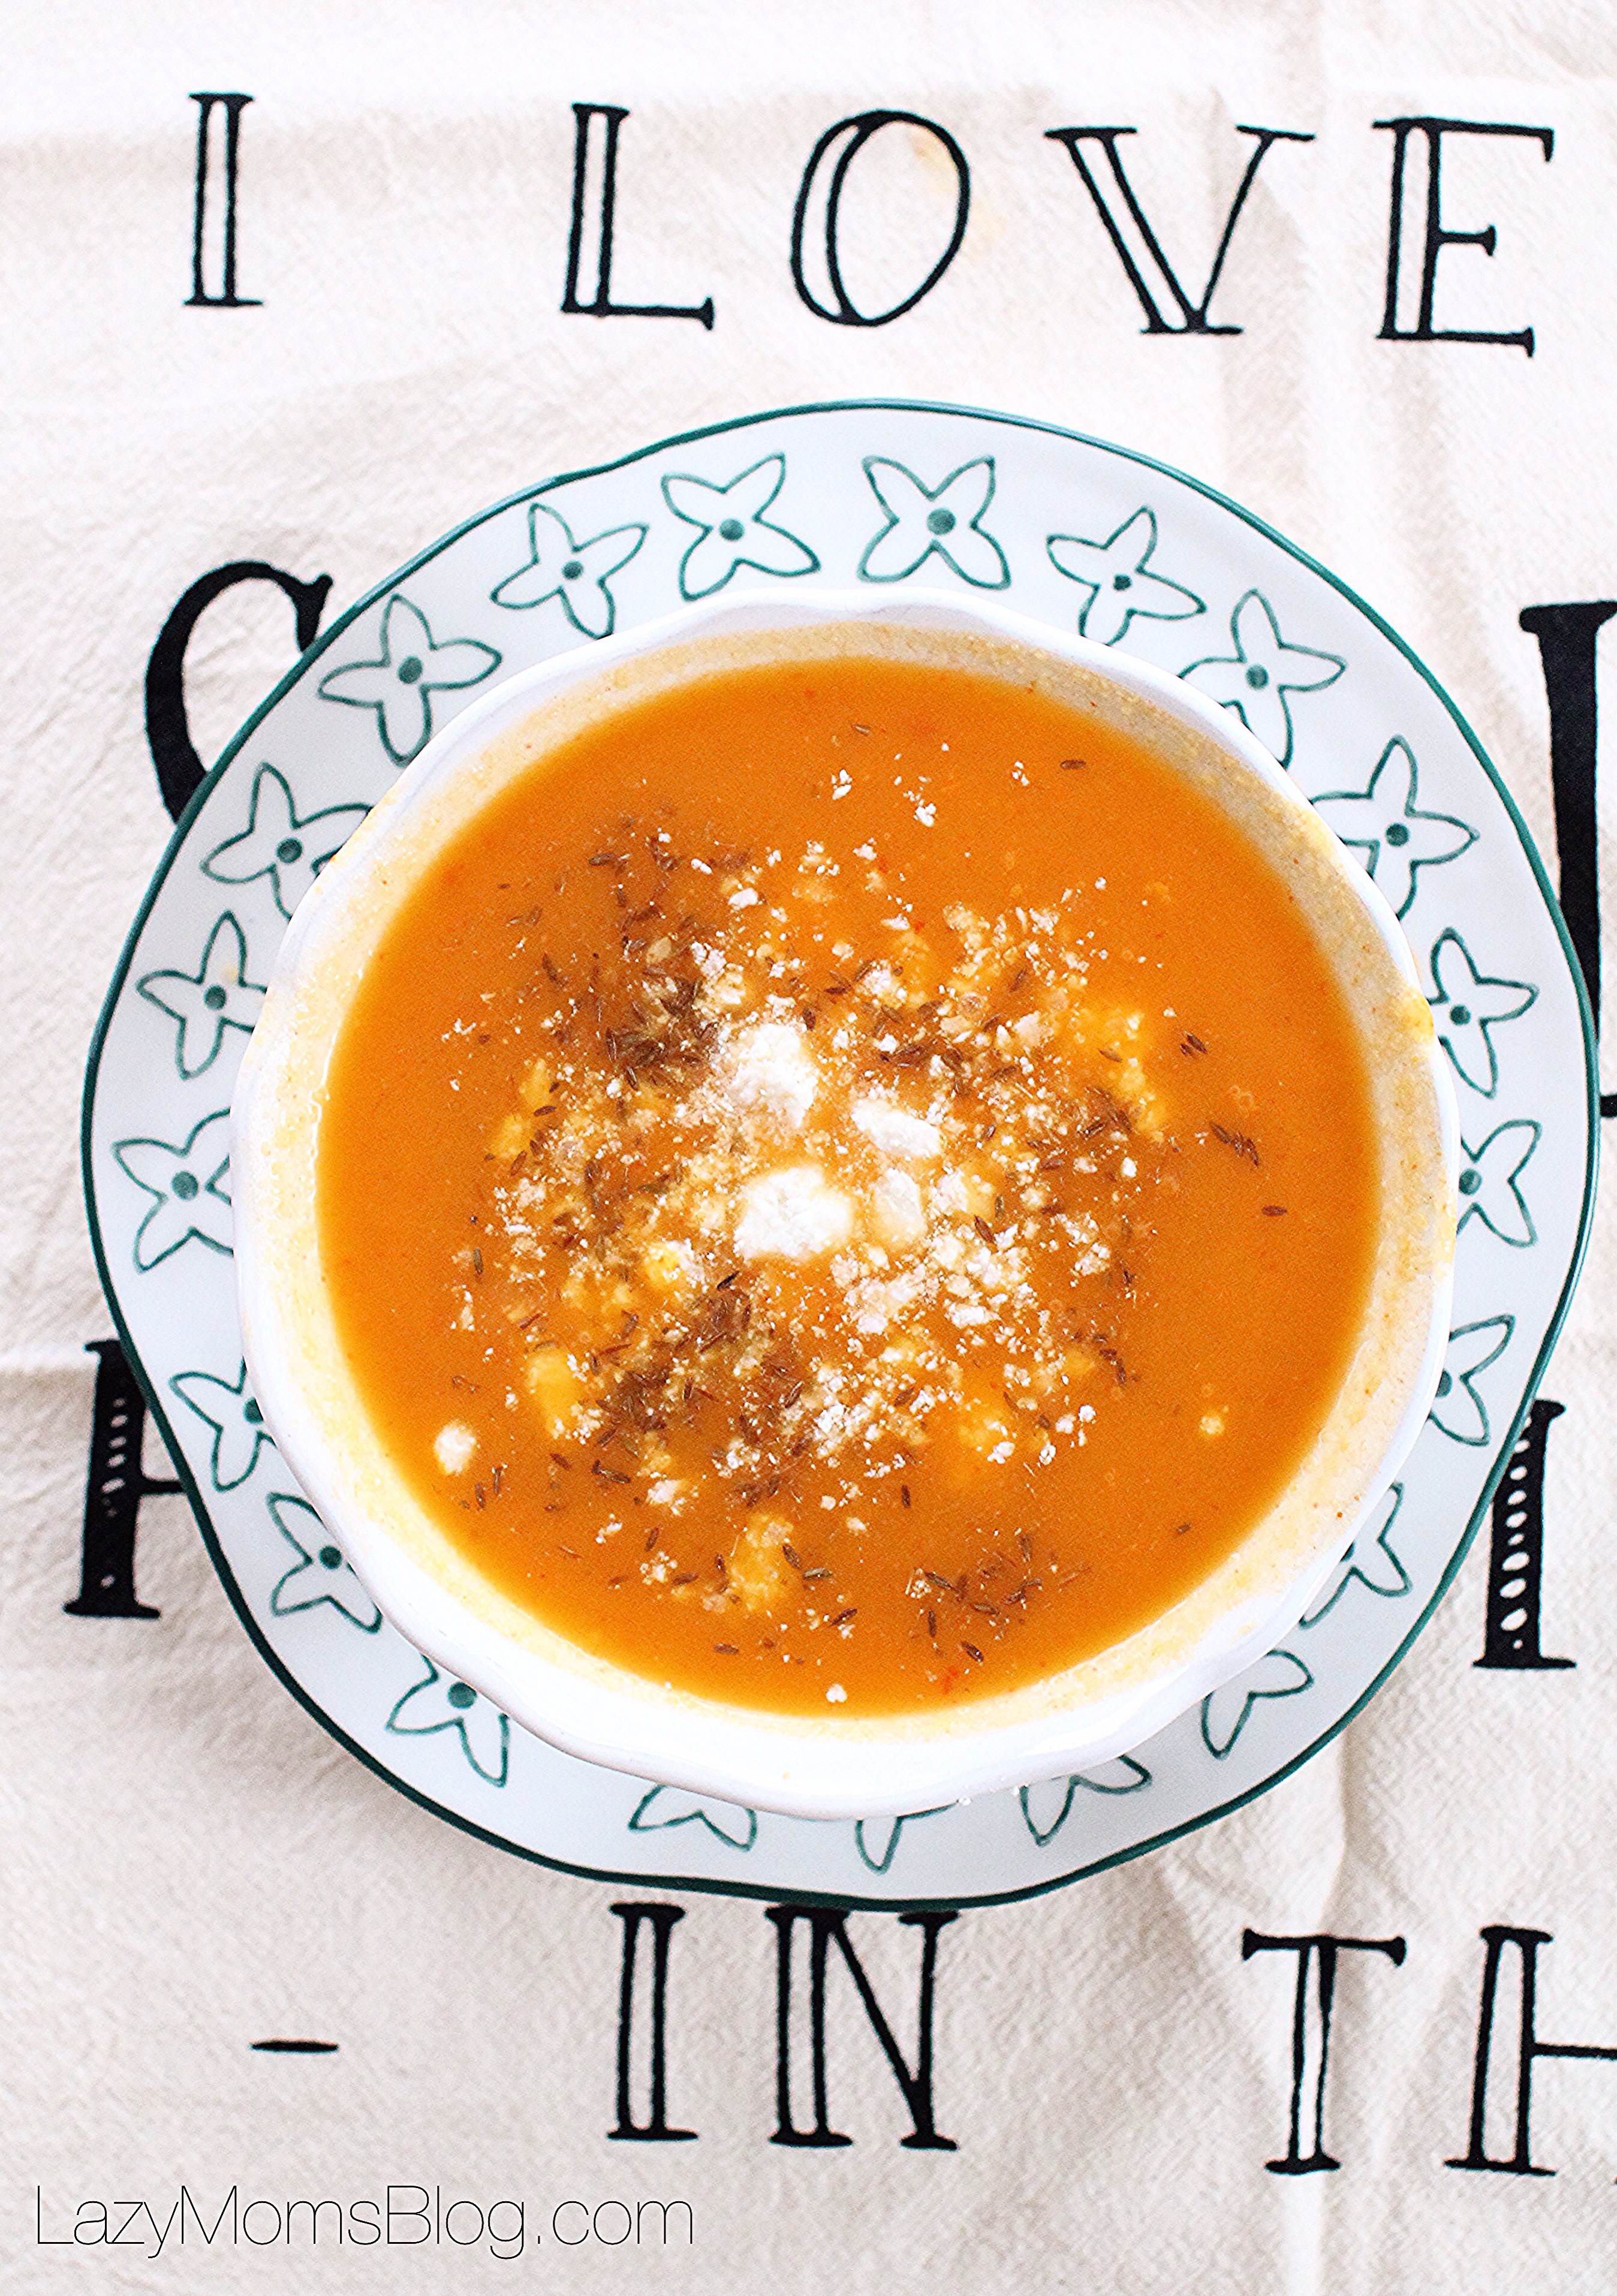 roasted pepper and peanut squash soup